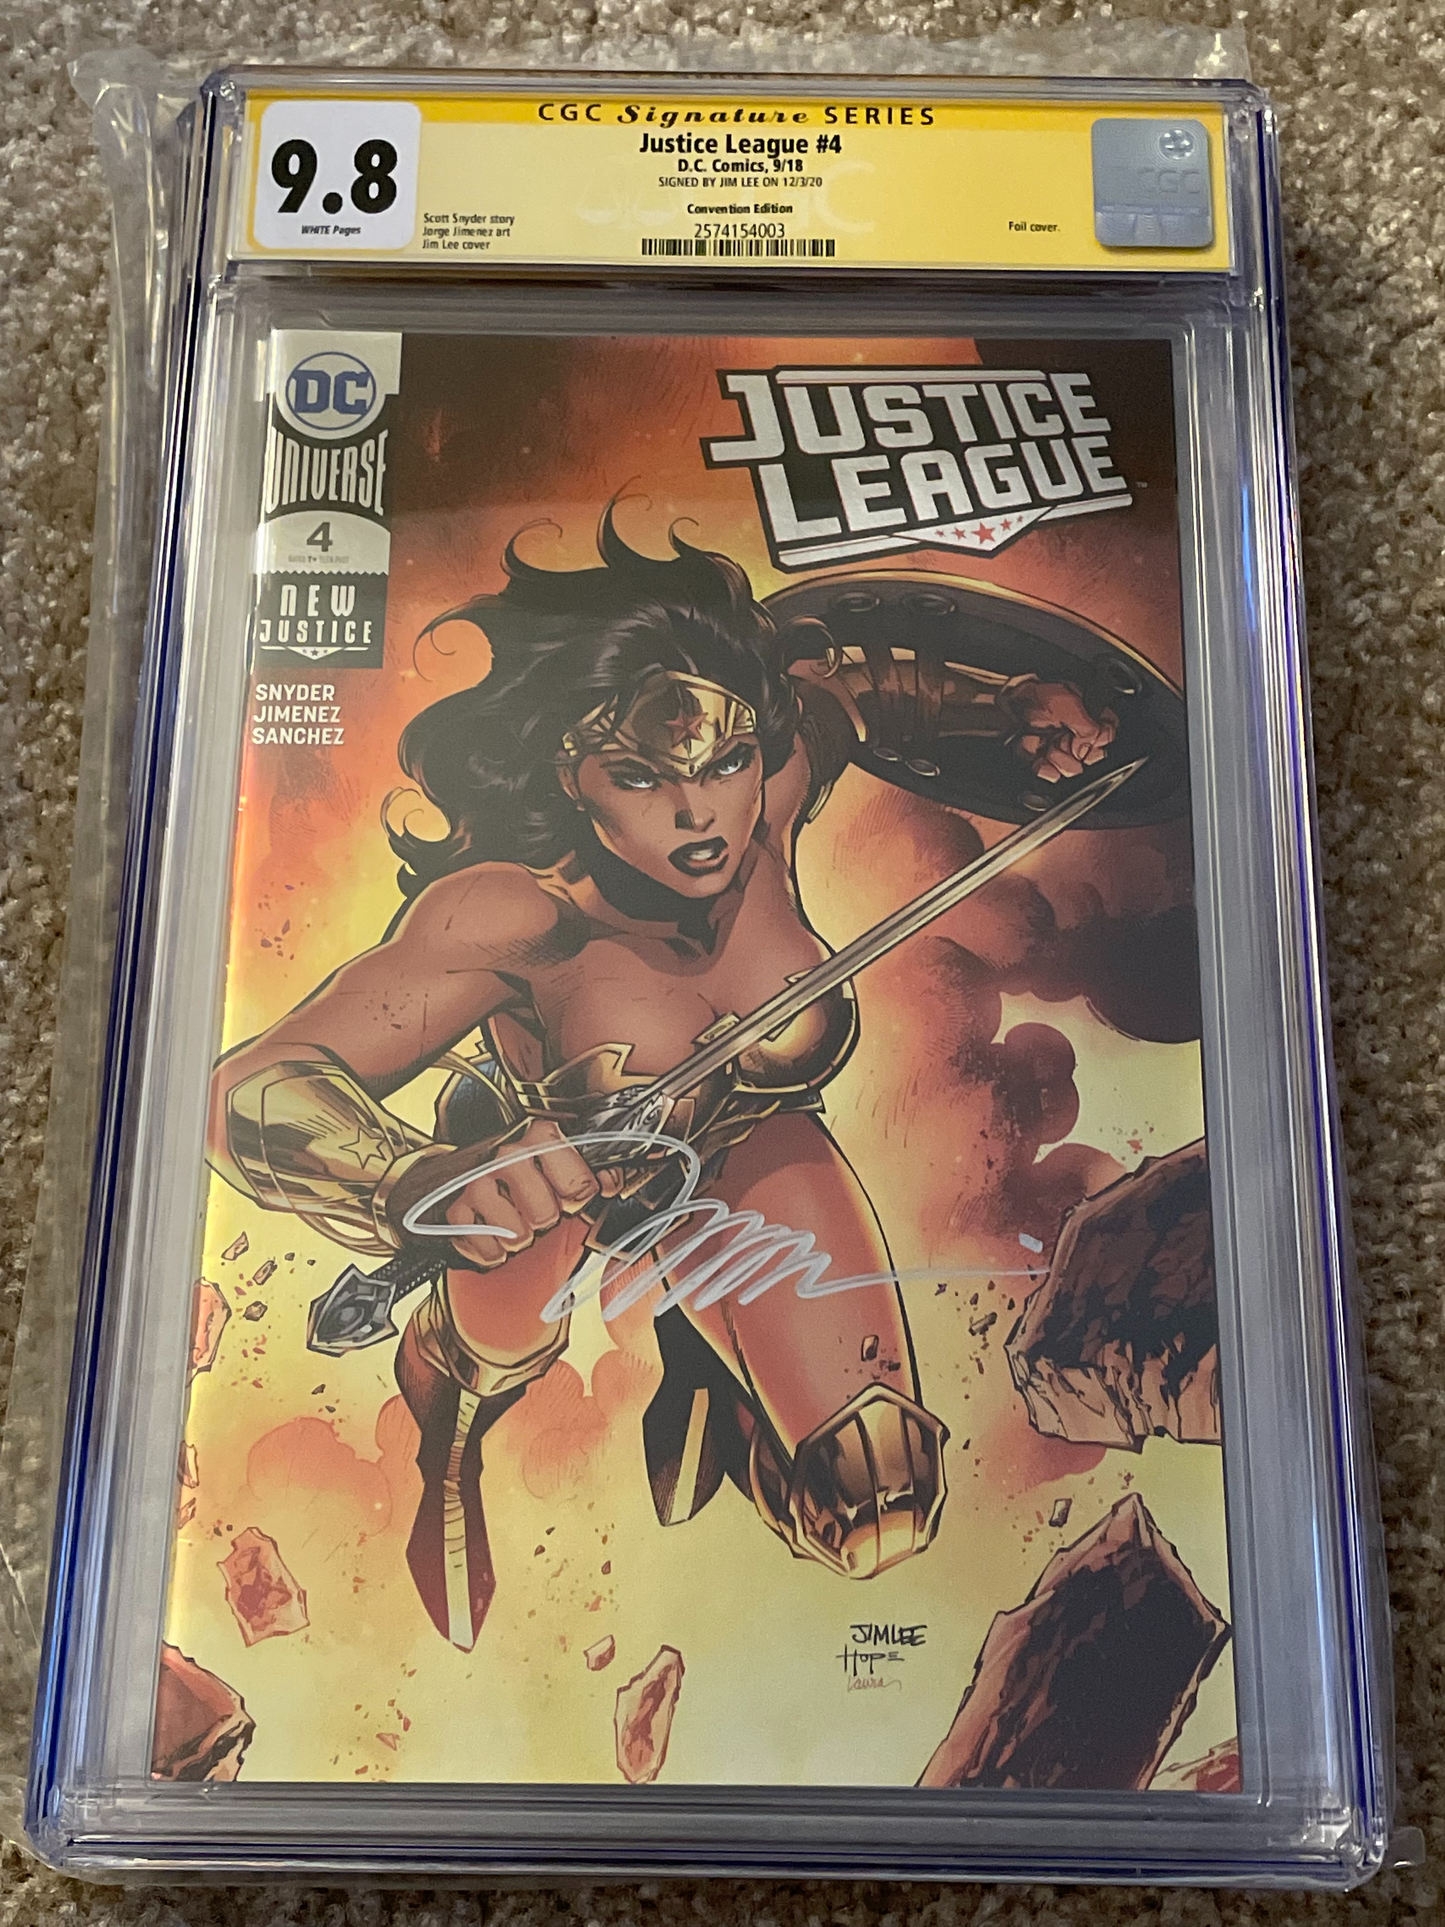 Justice League #4 CGC SS 9.8 Signed by Jim Lee